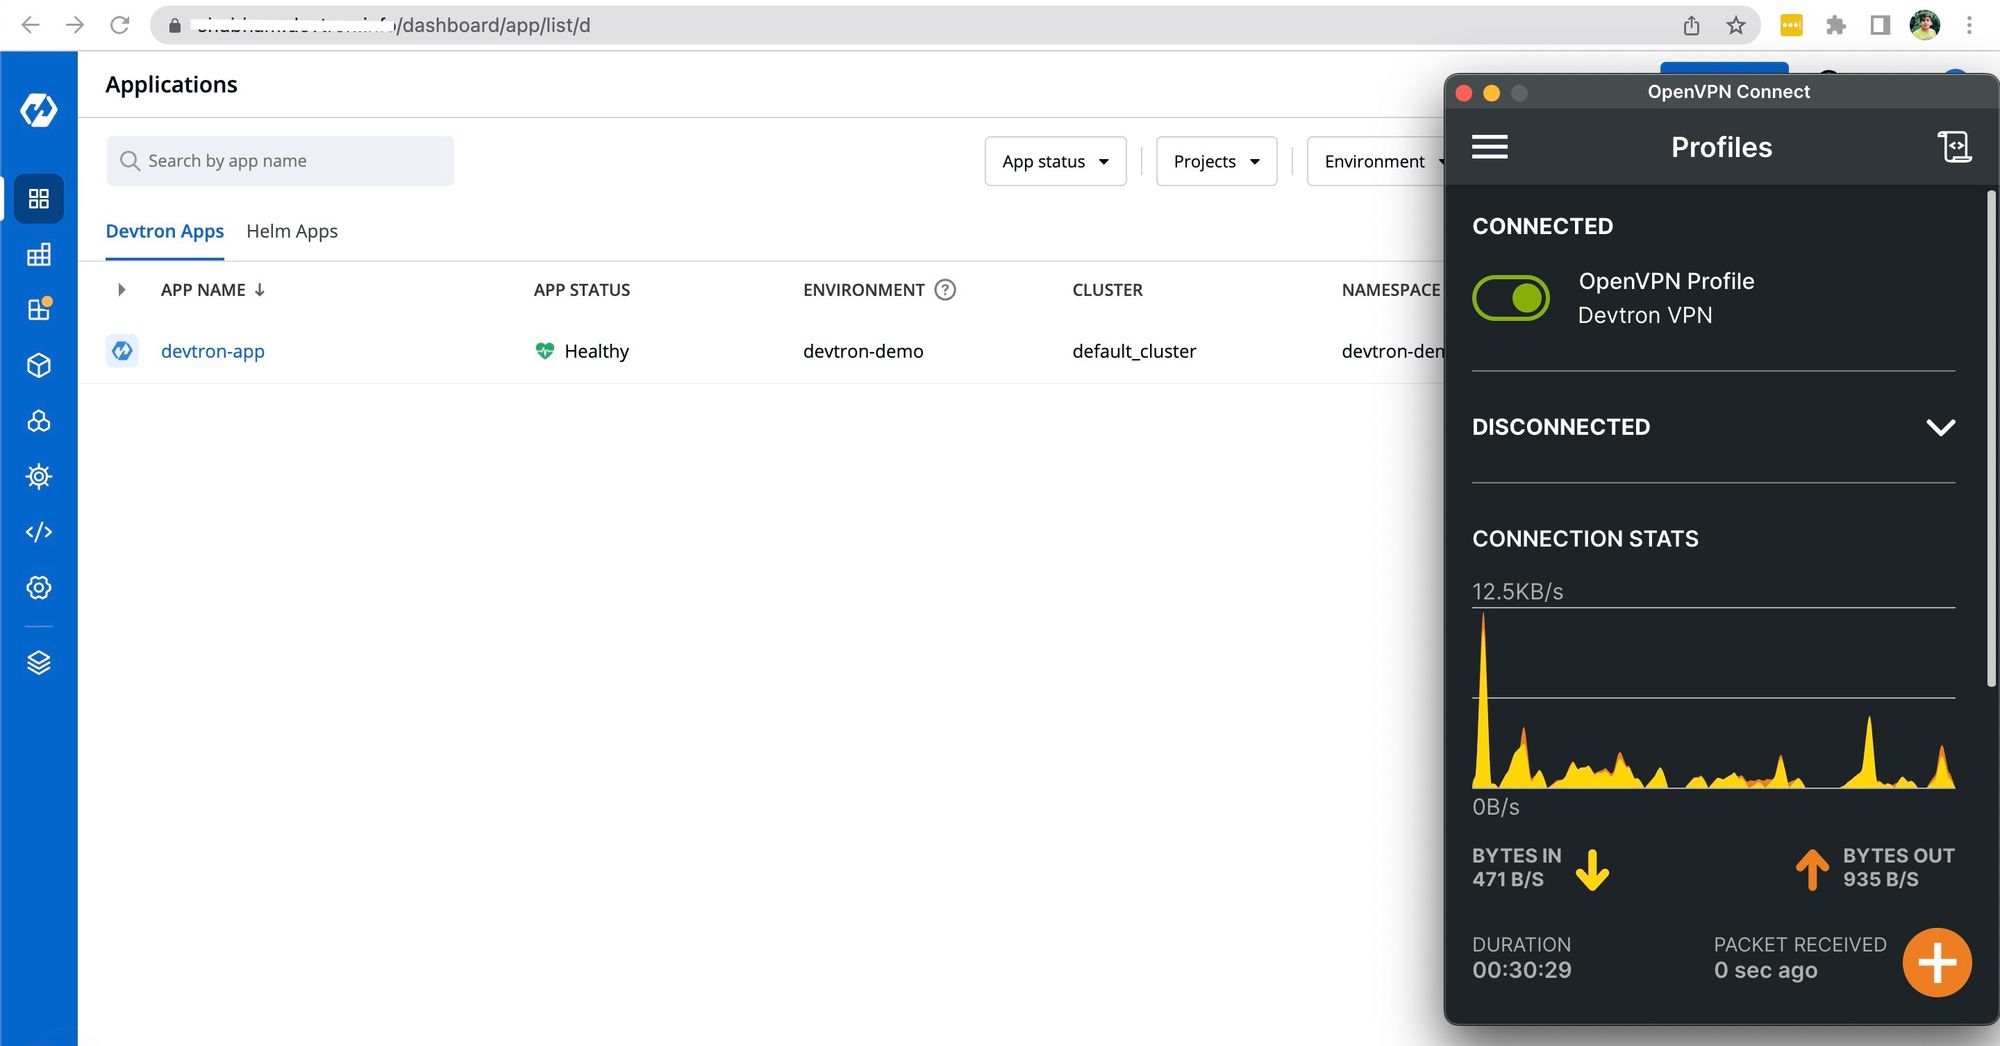 Kubernetes dashboard i.e Devtron is accessible as soon as VPN is connected